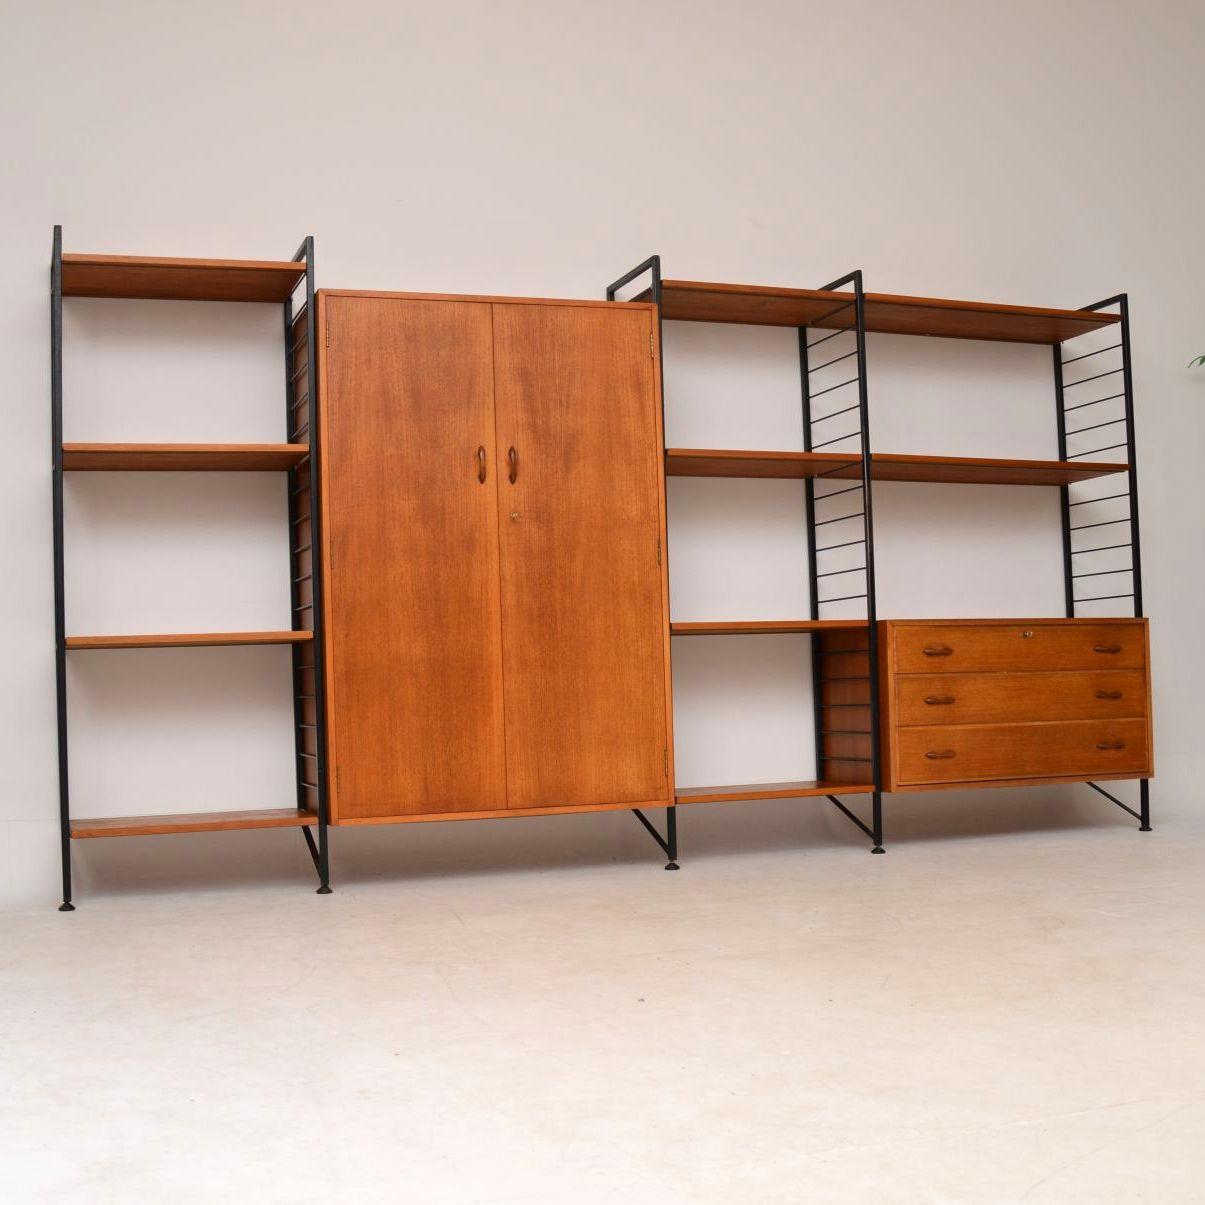 A stylish and very impressive ladderax wall unit, this is ideal for the bedroom and is quite a sizeable piece. It consists of a wardrobe, chest of drawers, shelves and five ladder rails. The condition is great throughout, it’s all very clean, sturdy